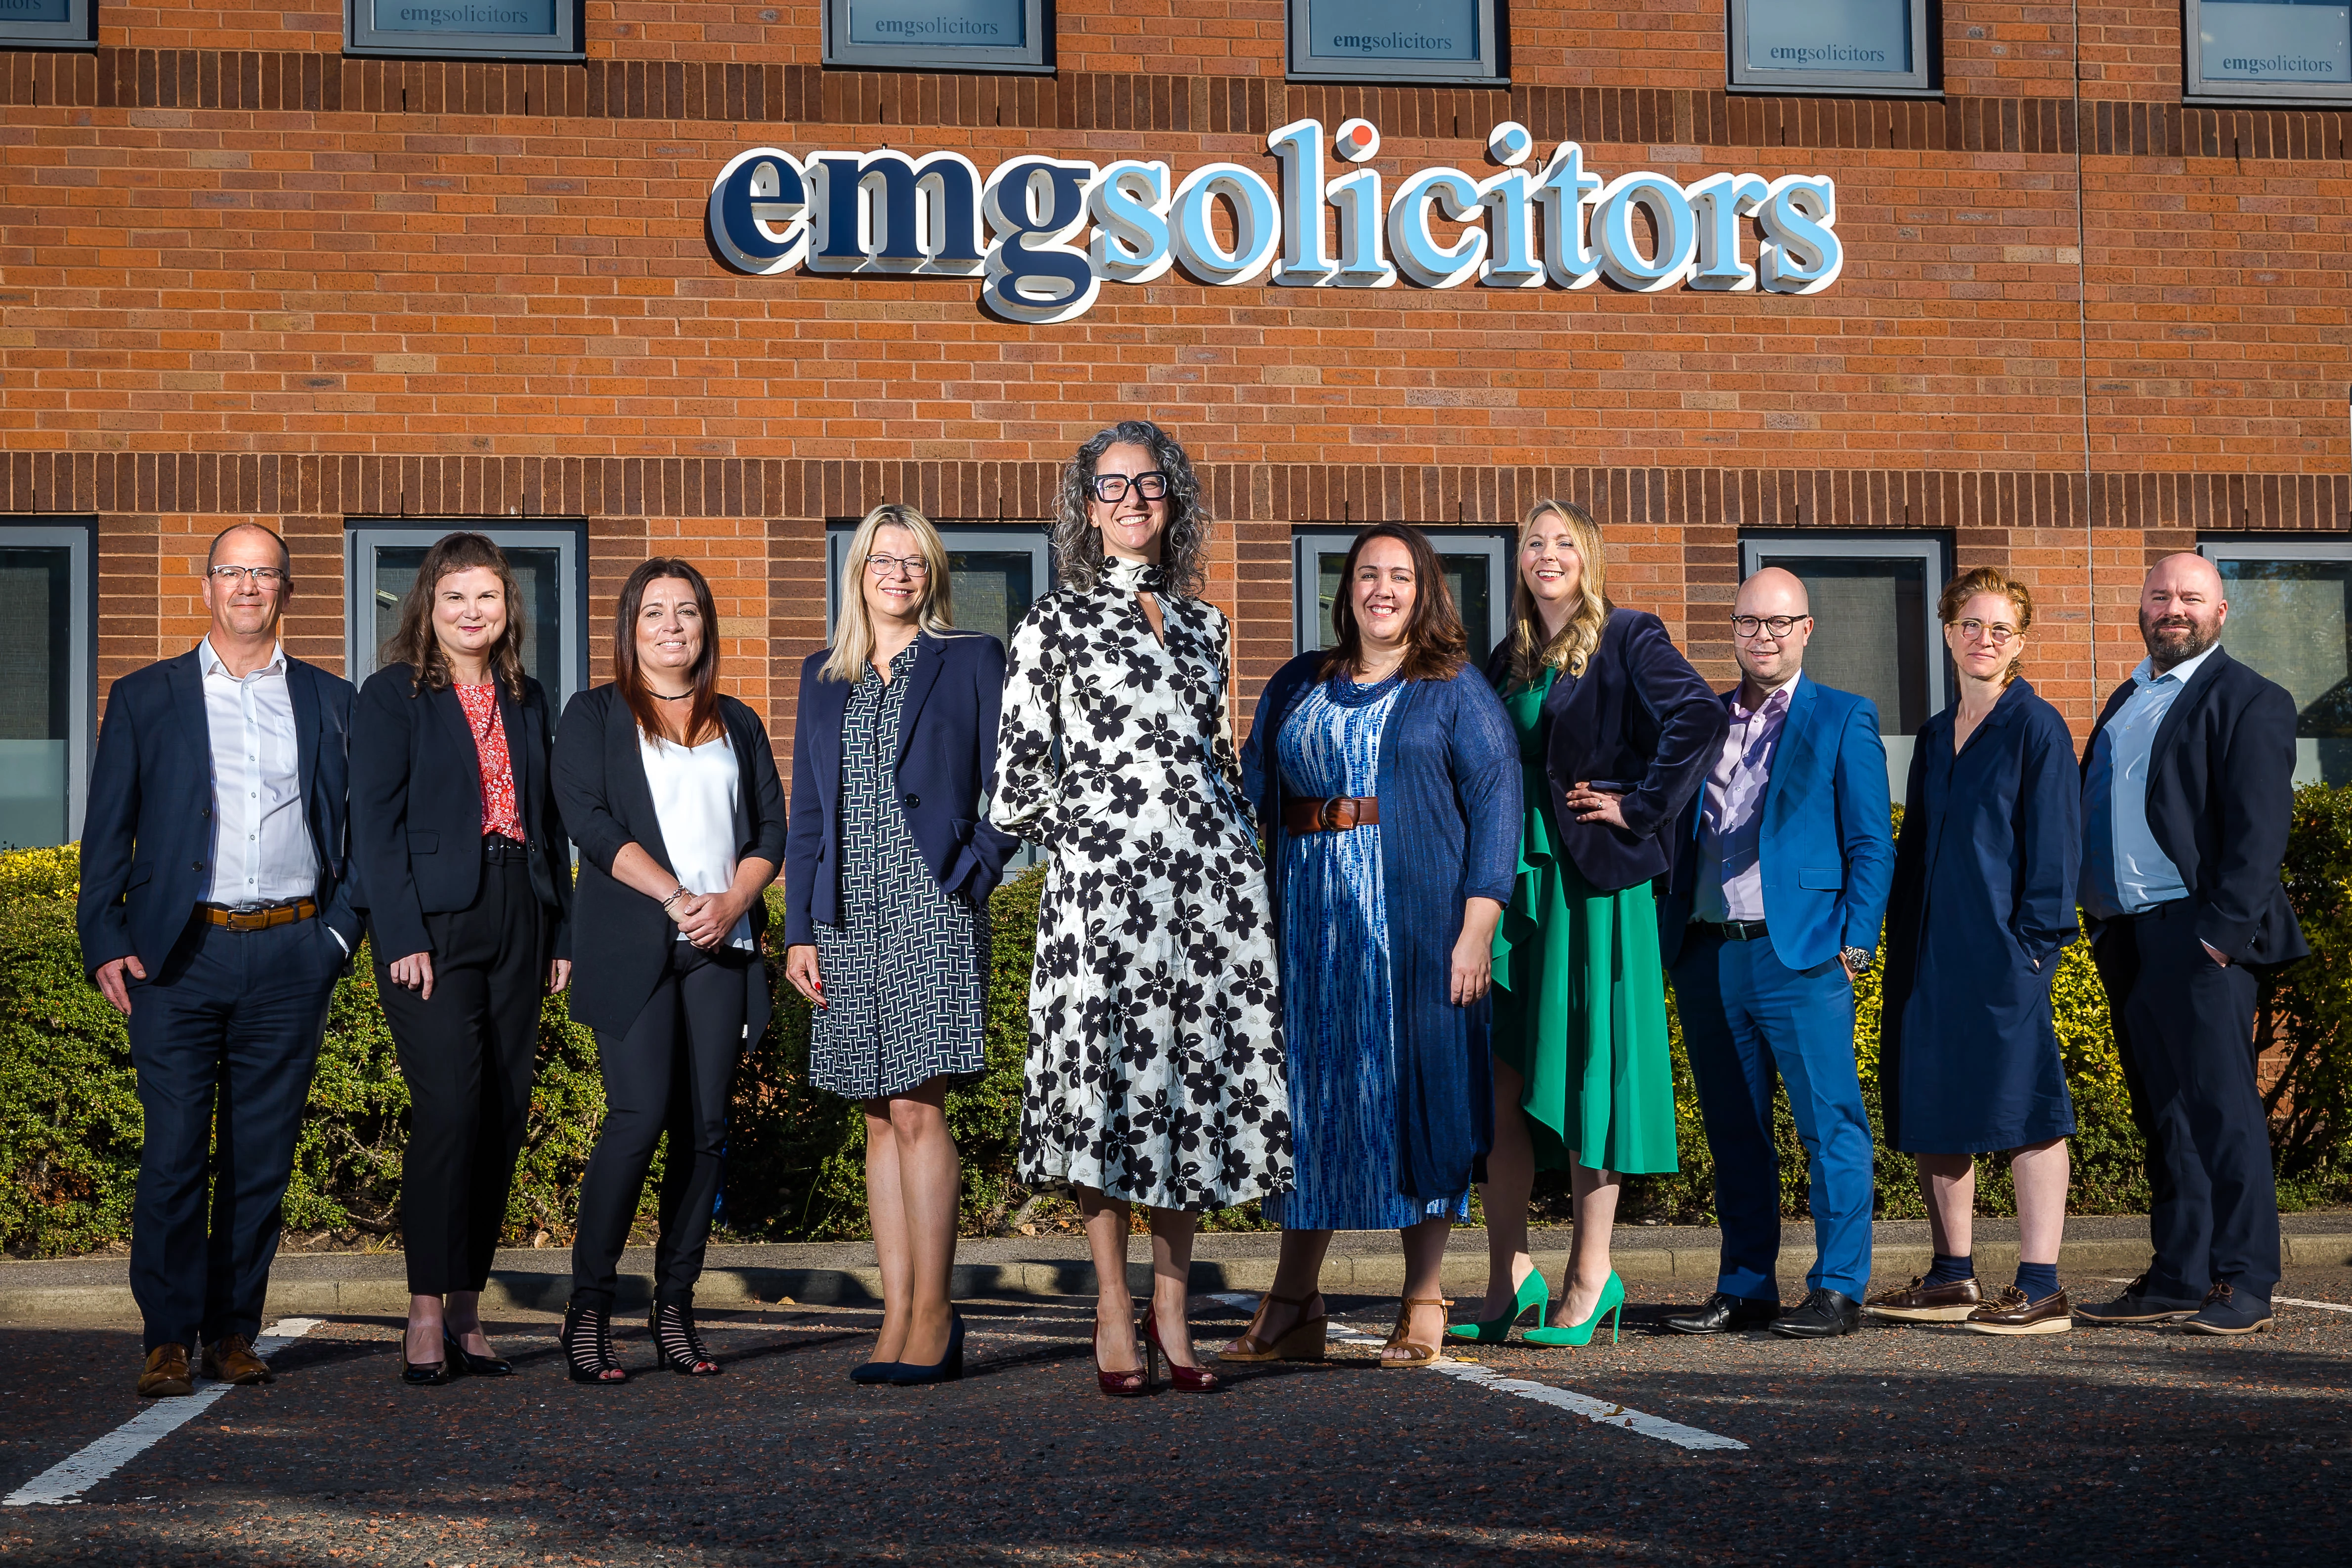 The team at EMG Solicitors